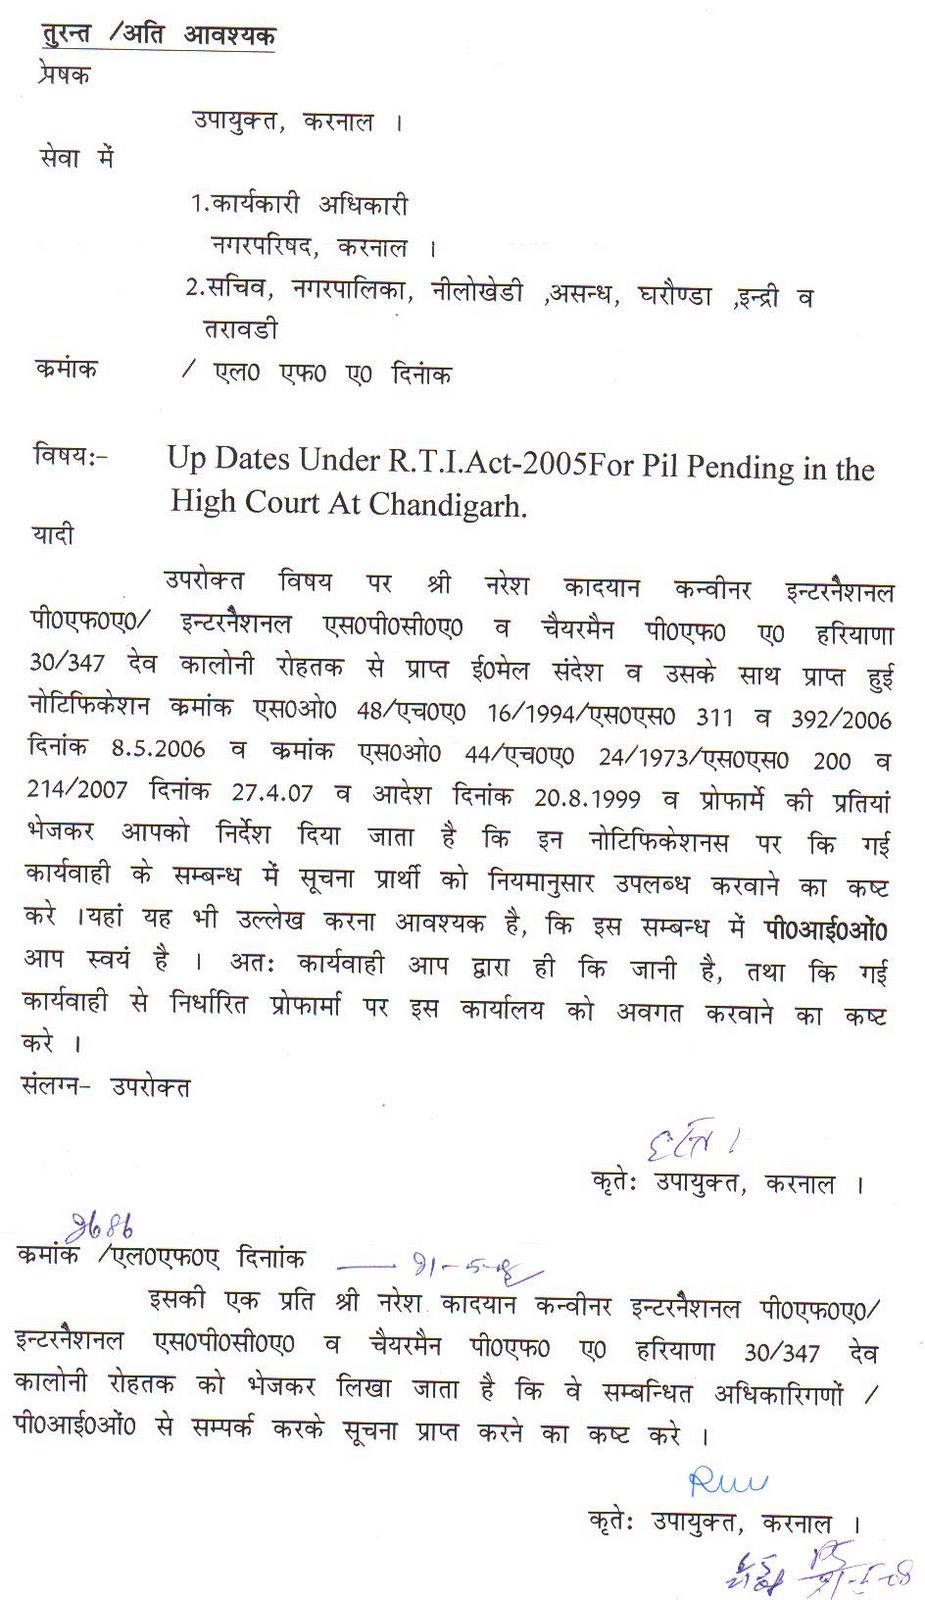 REPLY OF DEPUTY COMMISSIONER, KARNAL UNDER RTI ACT